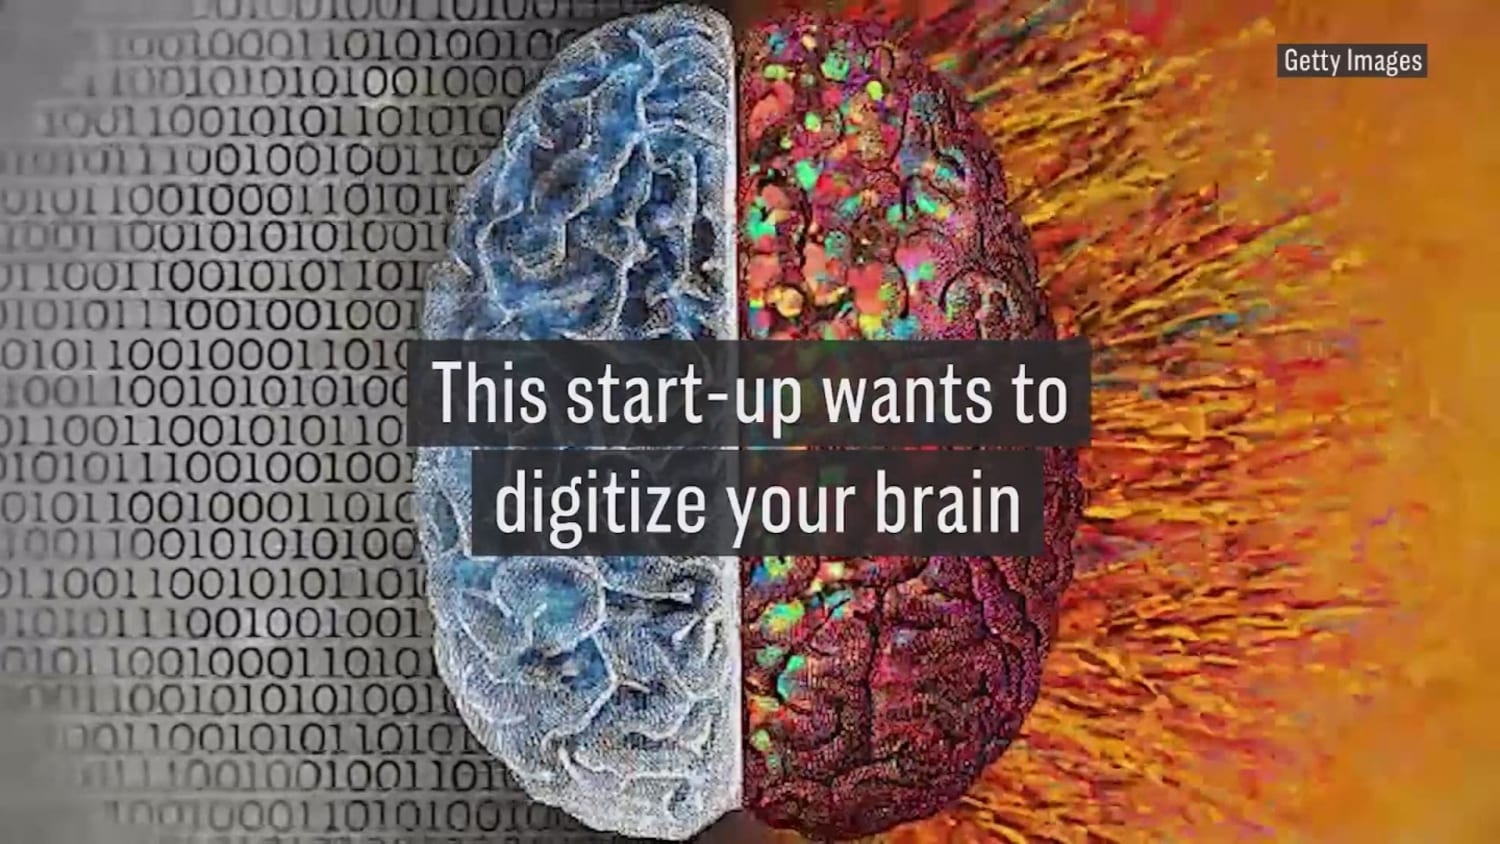 This start-up is looking to digitize your brain, but it comes at a cost...your life